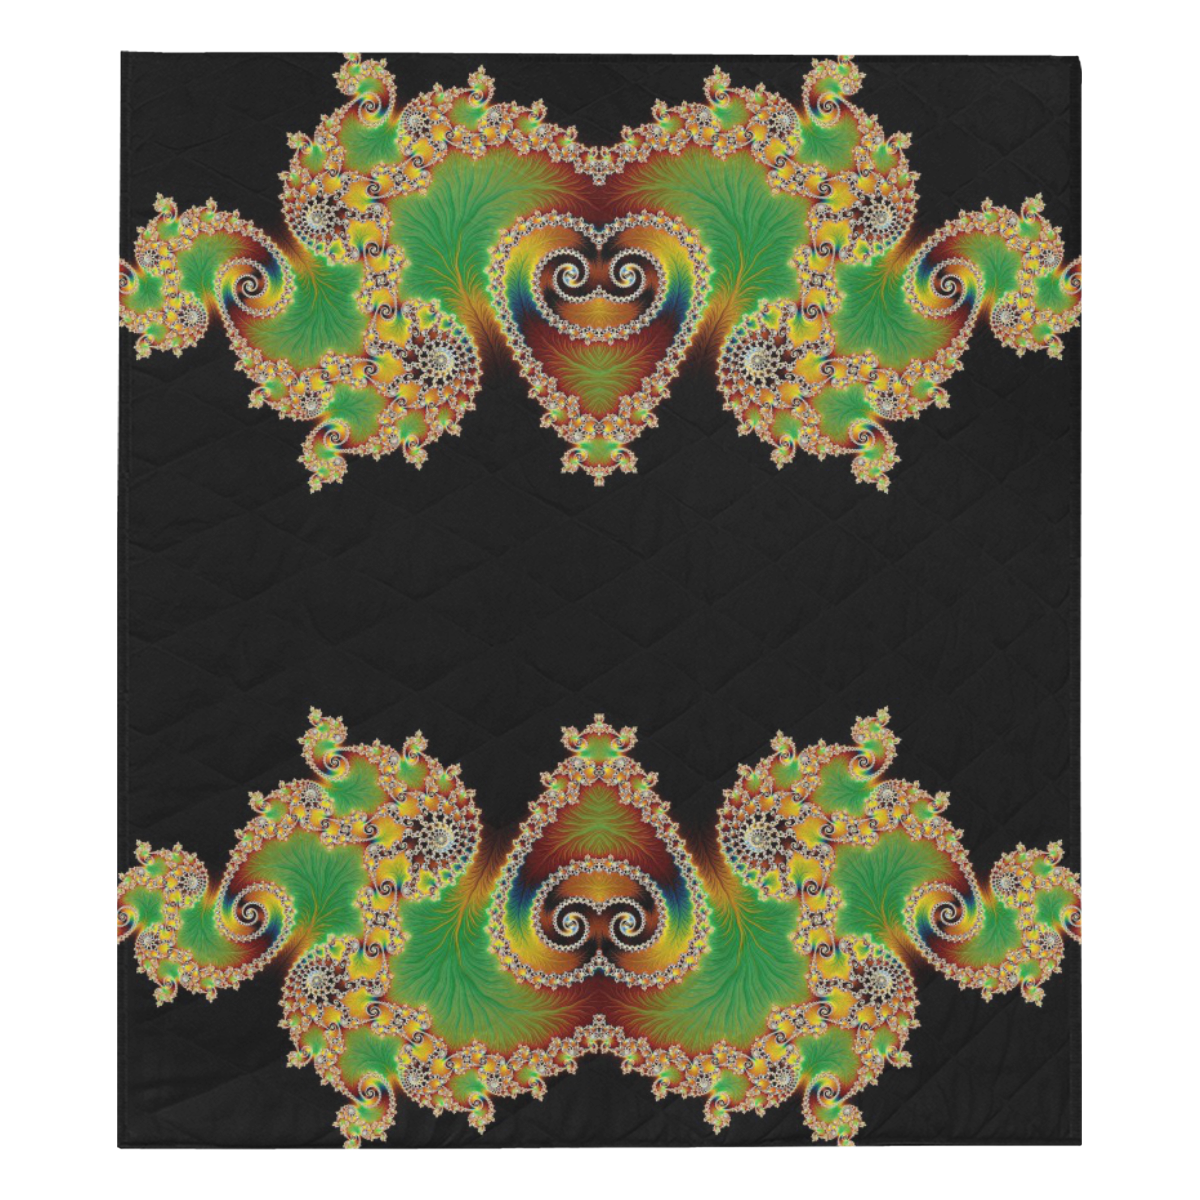 Green and Black  Hearts  Lace Fractal Abstract Quilt 70"x80"